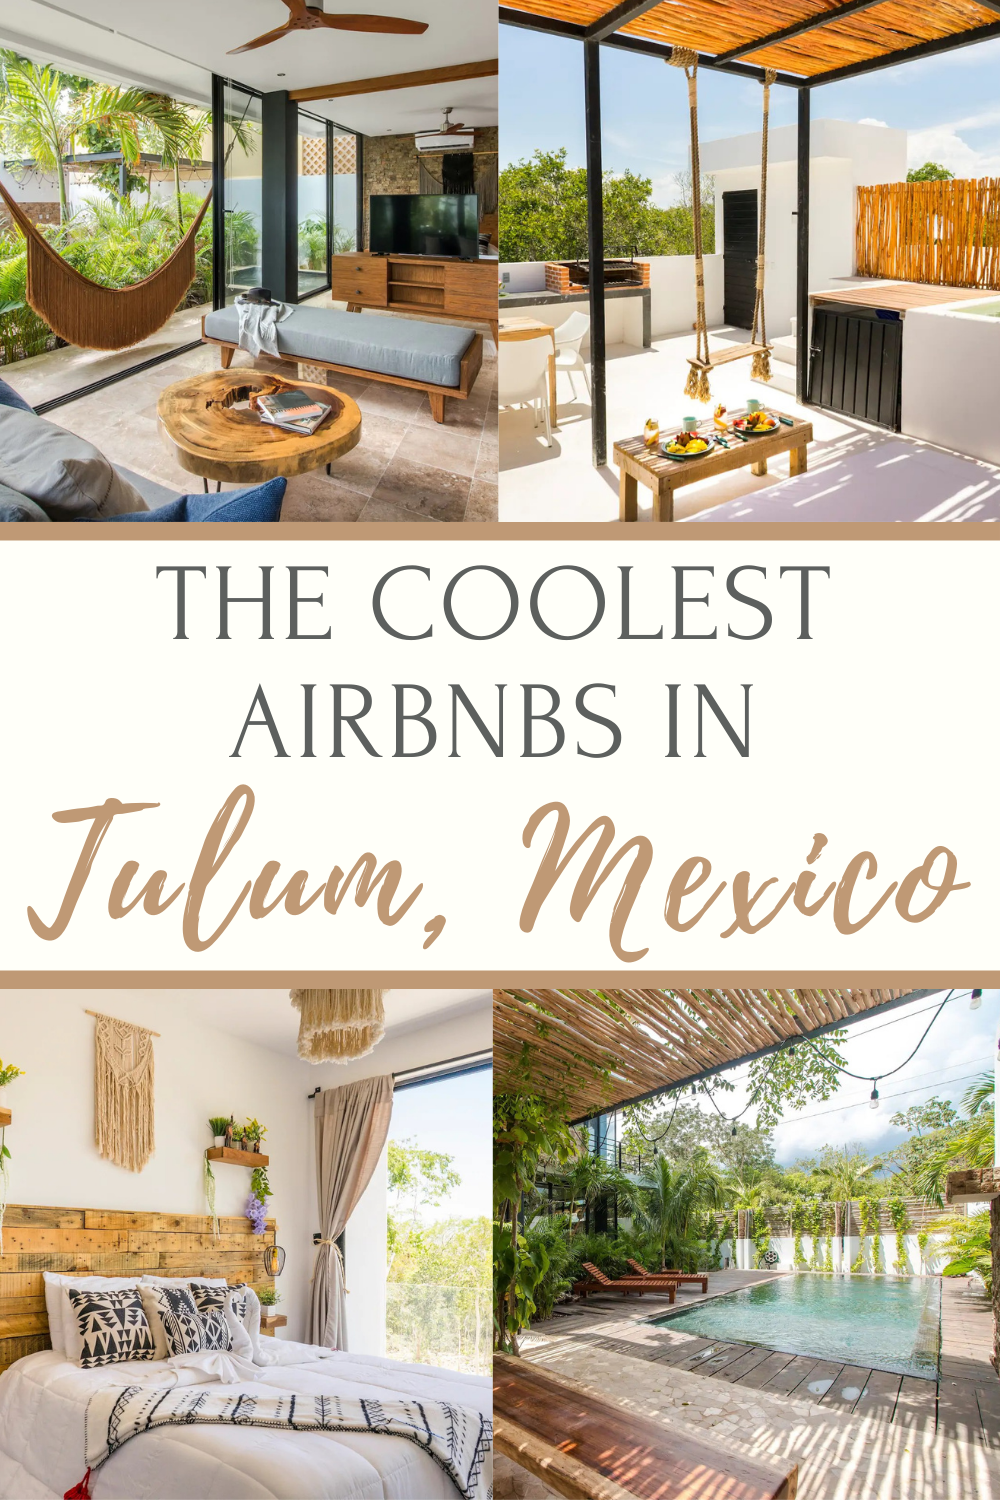 the Coolest Airbnbs in Tulum